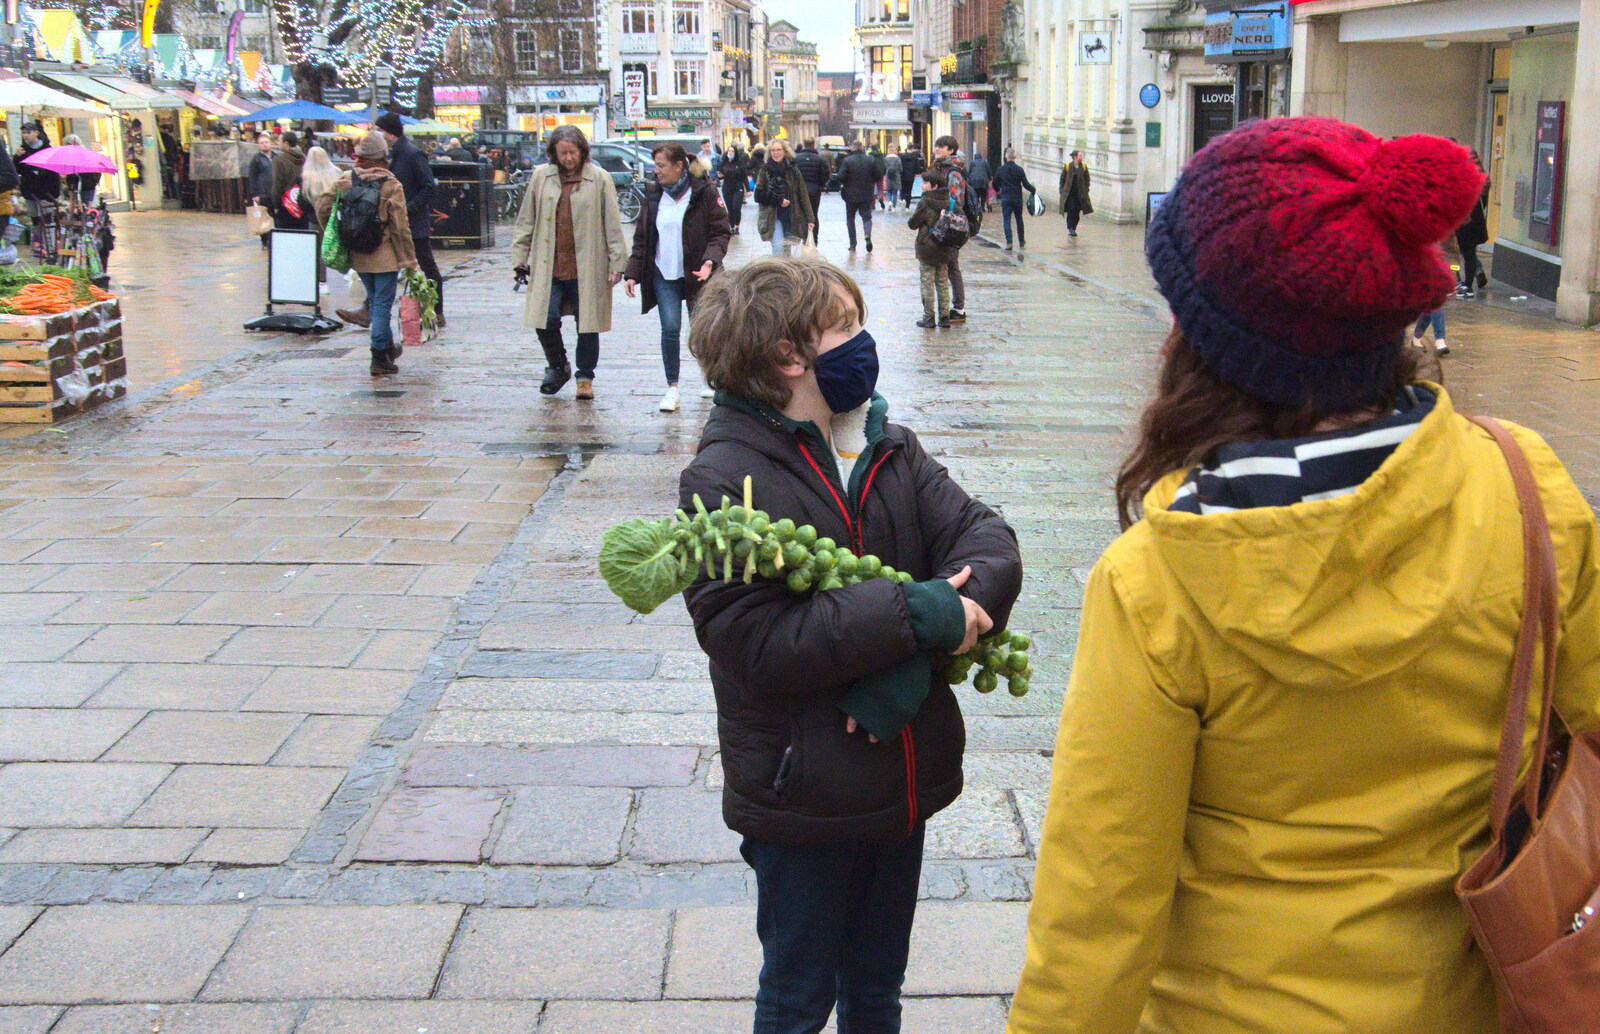 Fred with his sprout bazooka from A Bit of Christmas Shopping, Norwich, Norfolk - 23rd December 2020